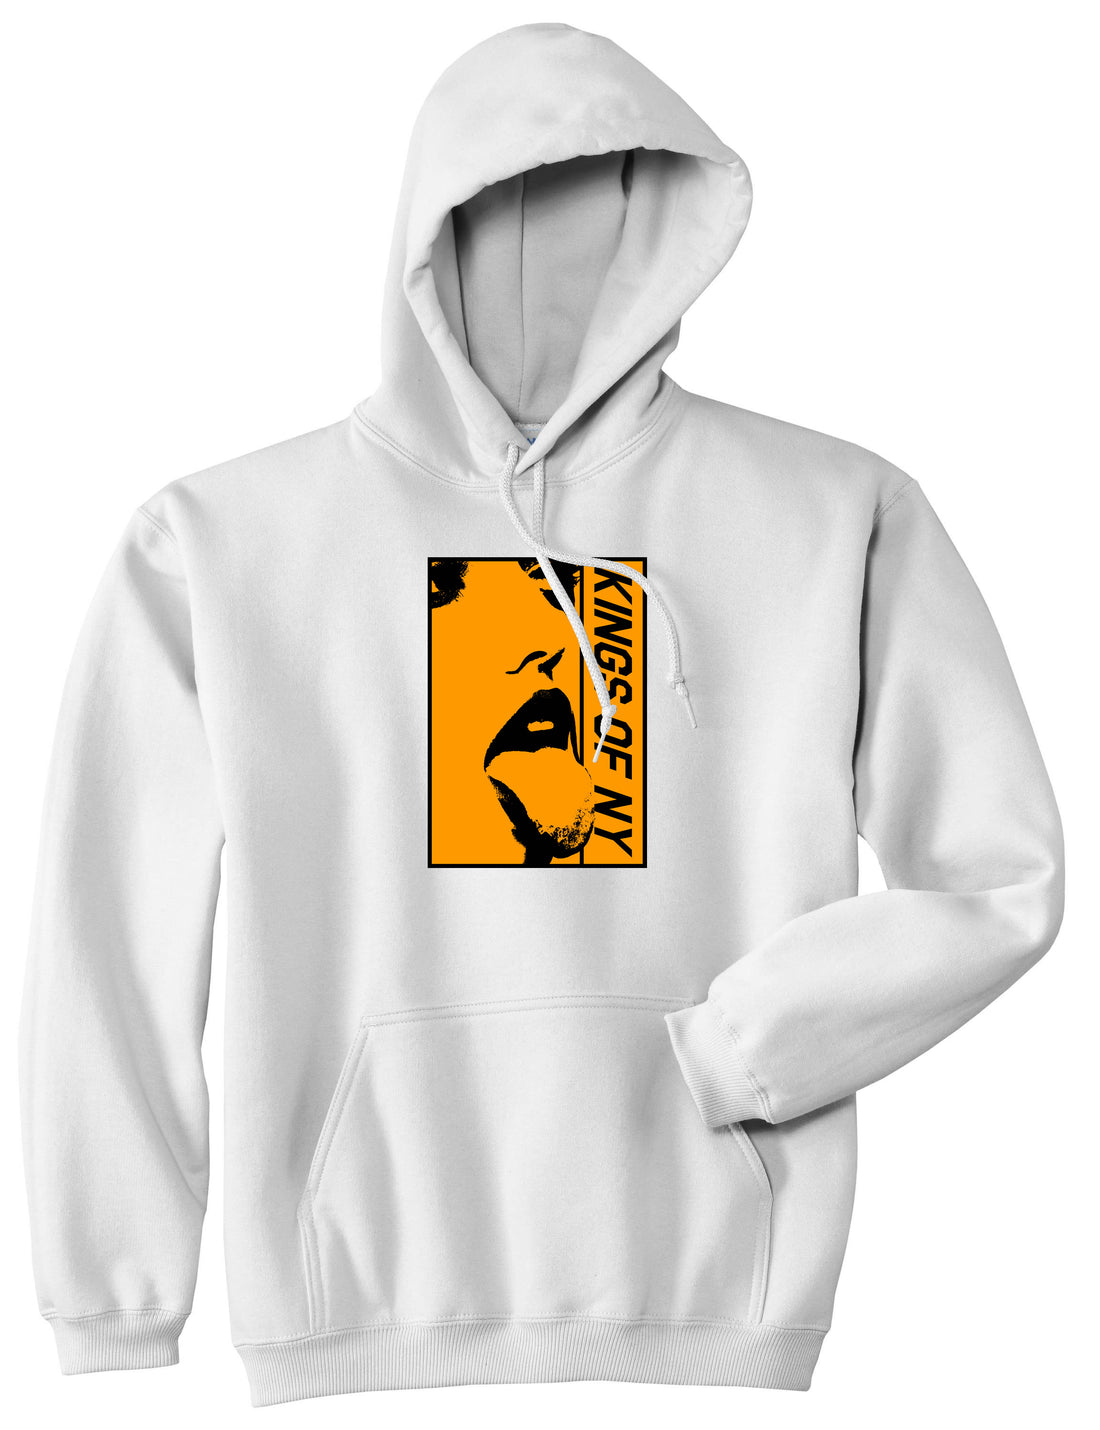 Open Minded Mens Pullover Hoodie White